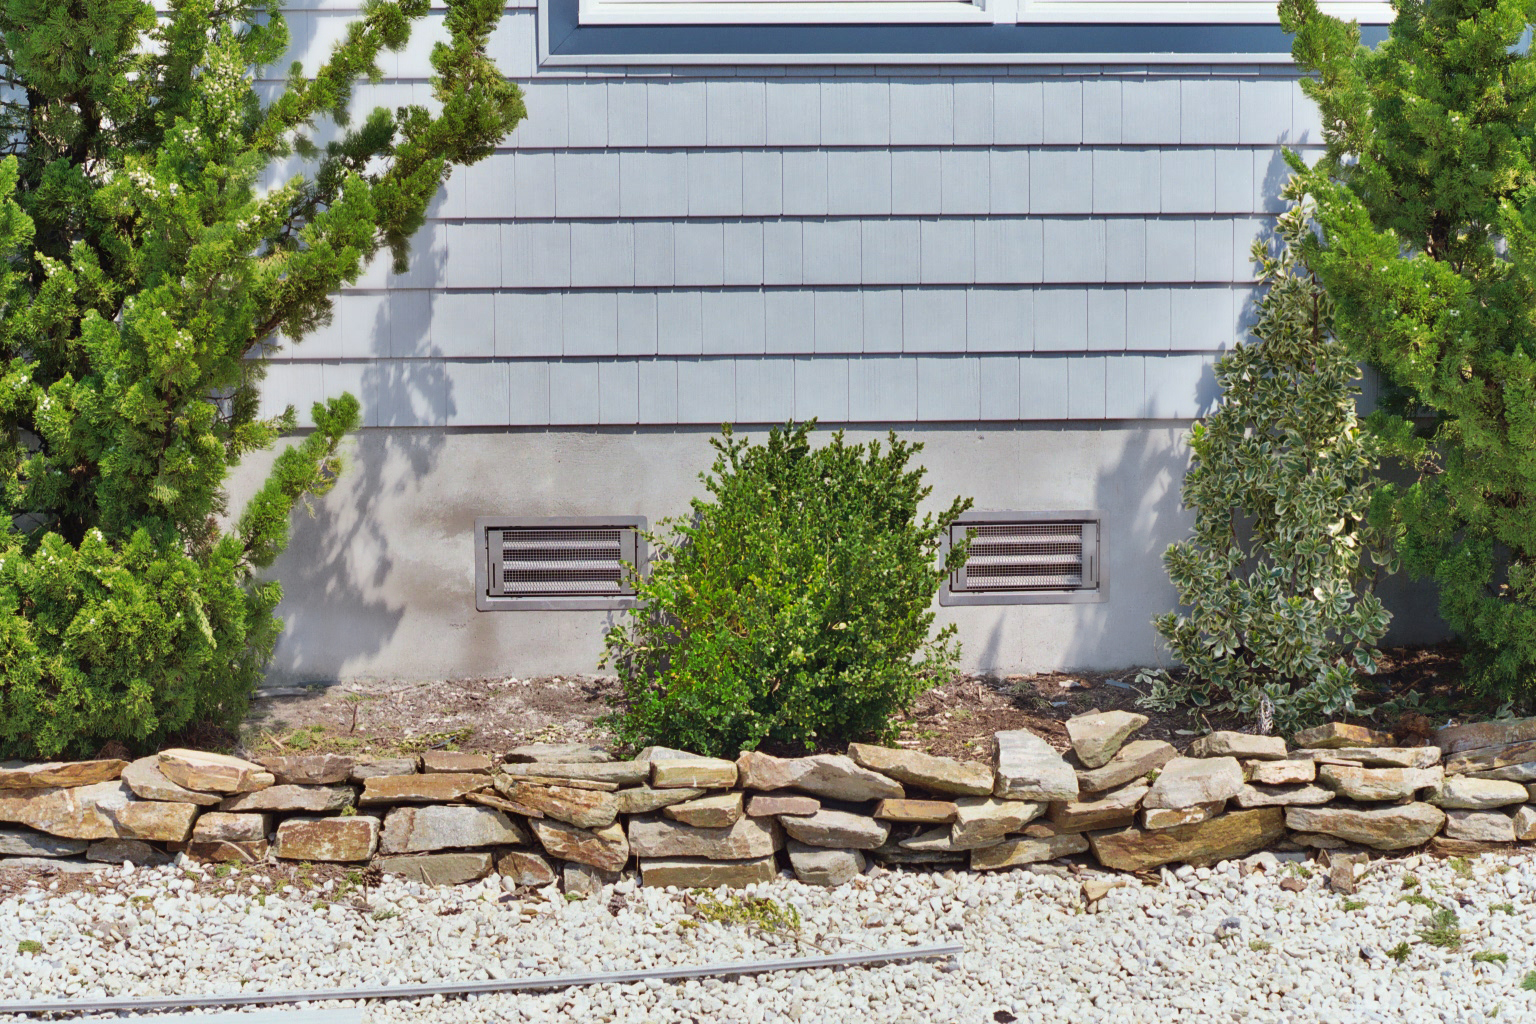 SmartVent flood vents installed on a home with bushes and rocks